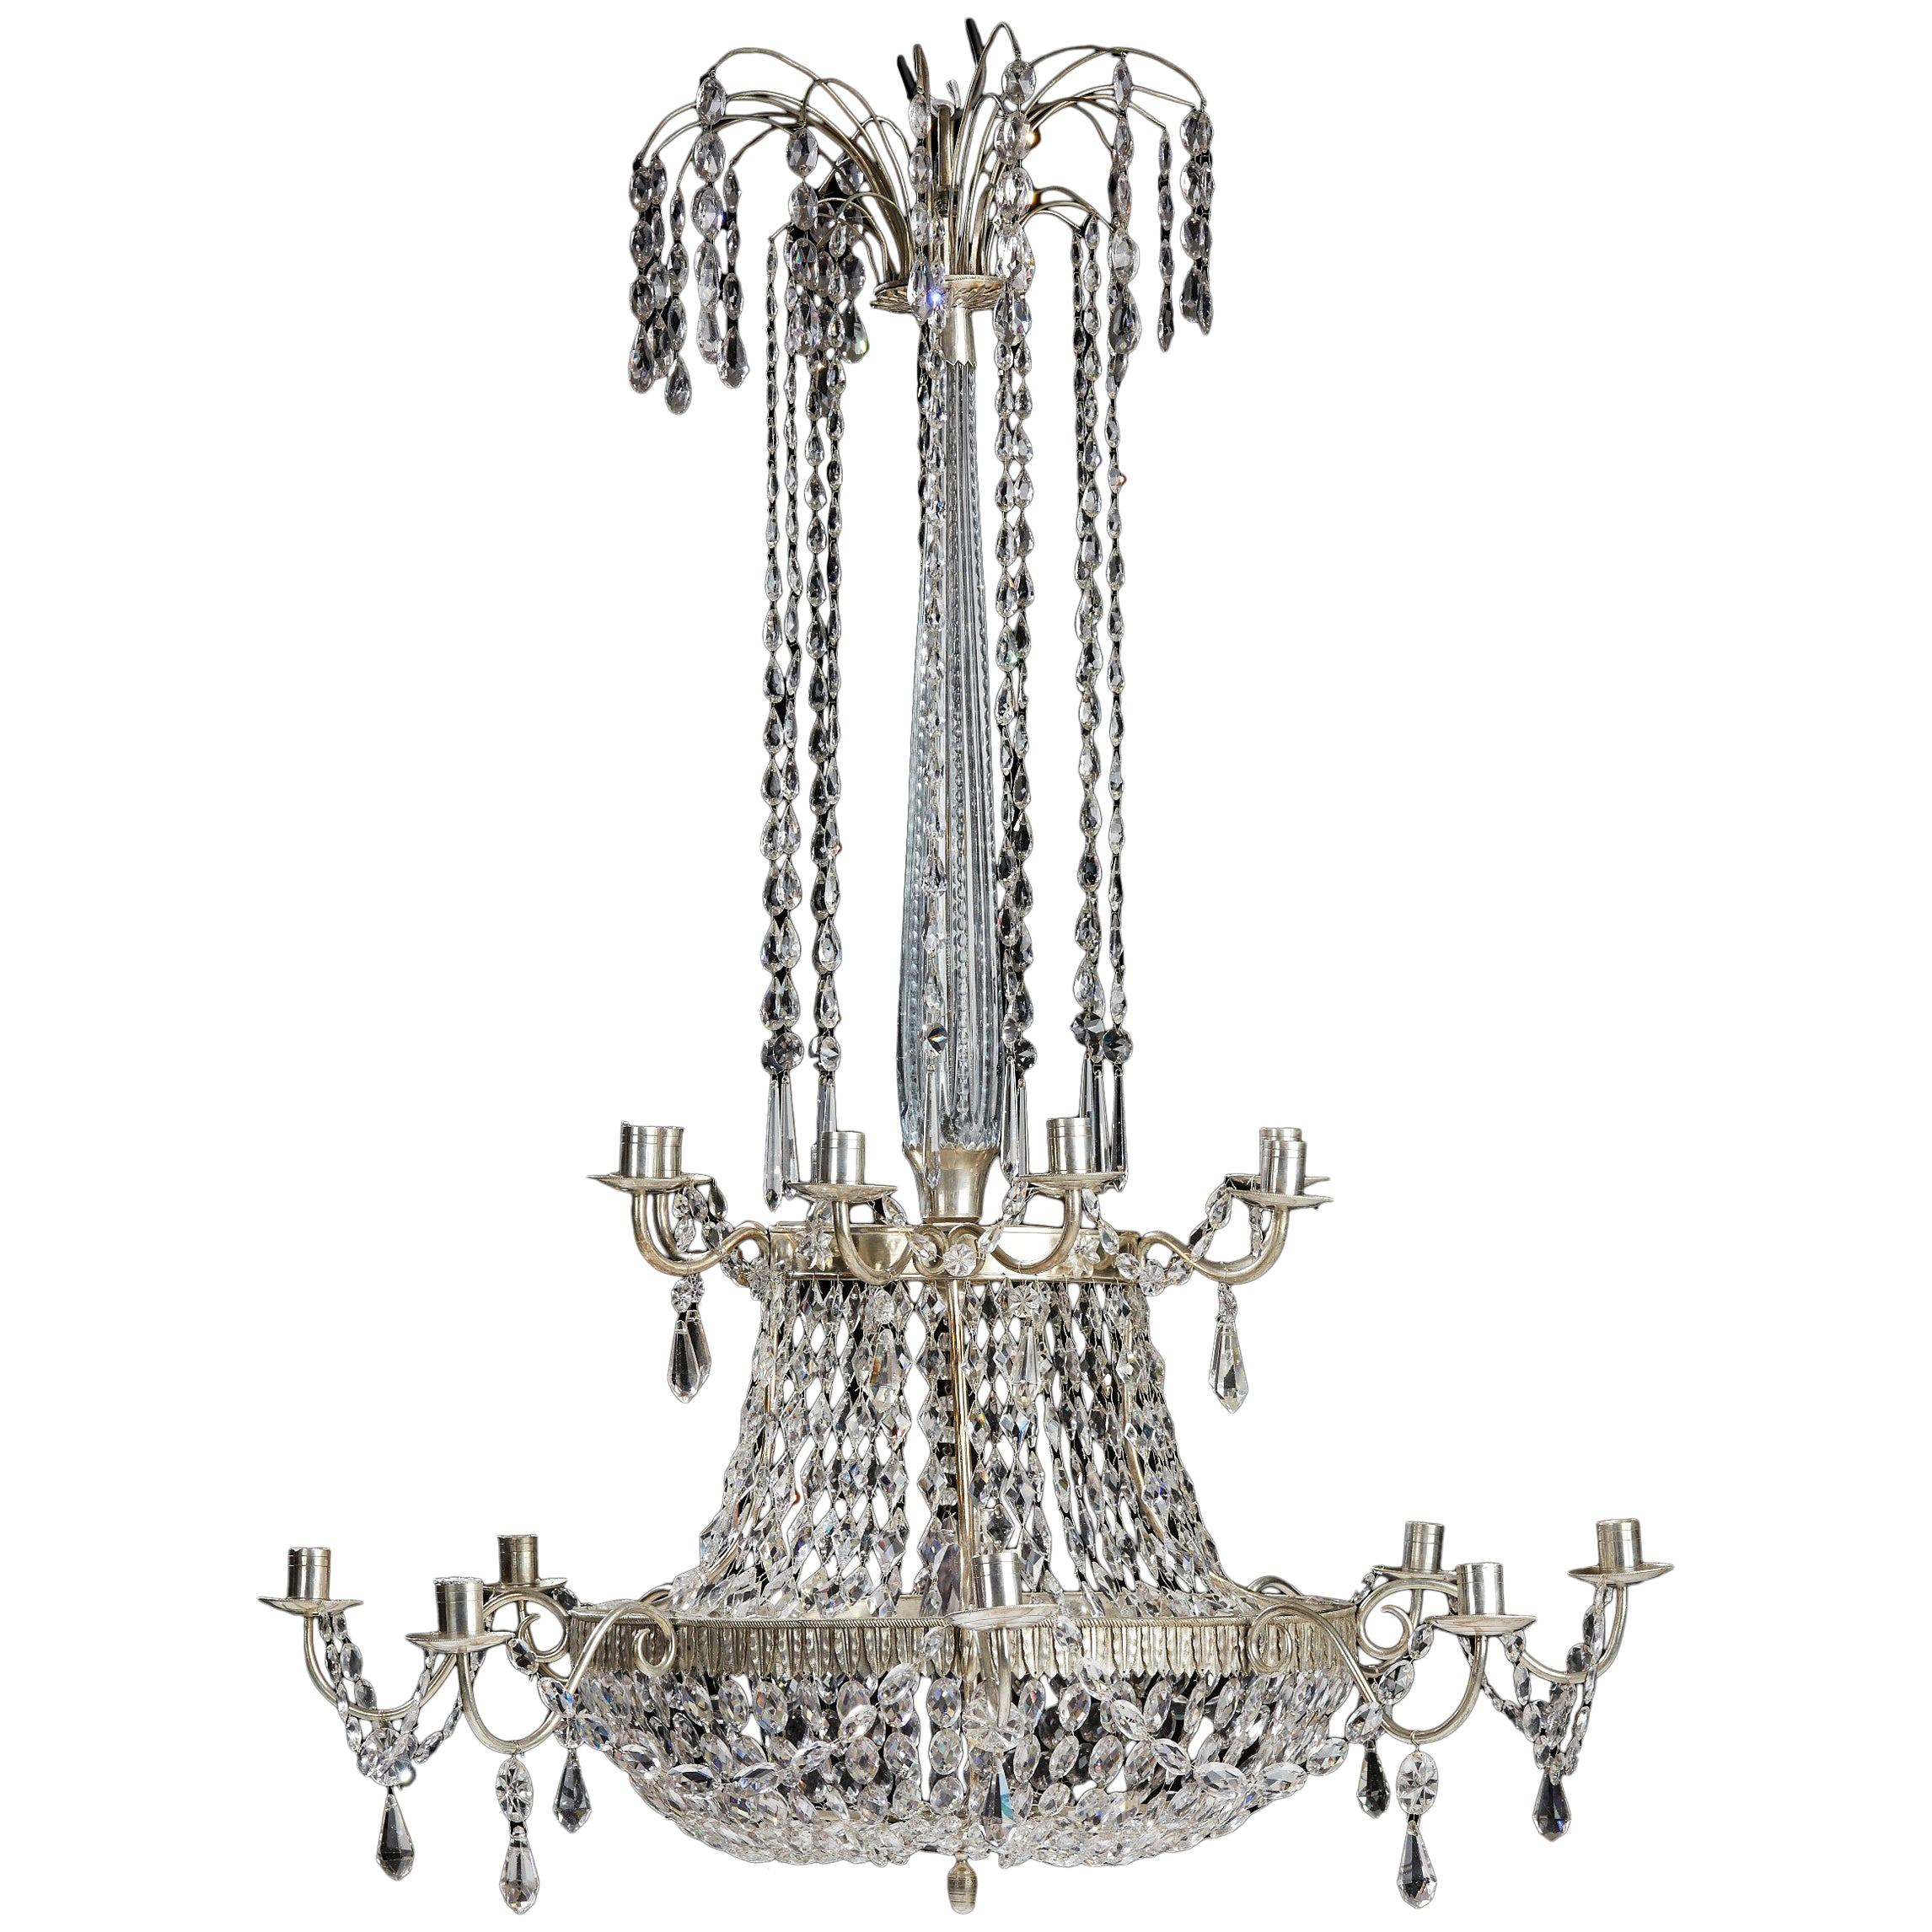 Silver Plated Bronze and Crystal Chandelier, Possibly Russian, 19th Century